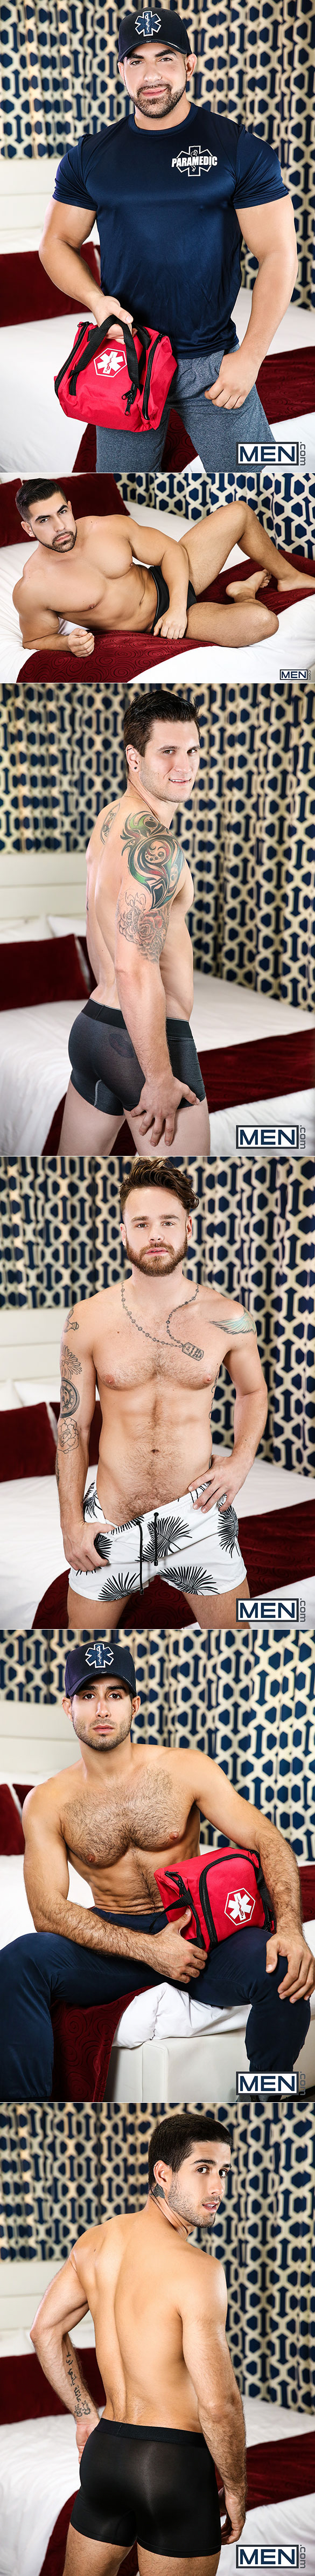 Men.com: Damien Stone and Diego Sans fuck Allen Lucas and Max Wilde in "Save Me"